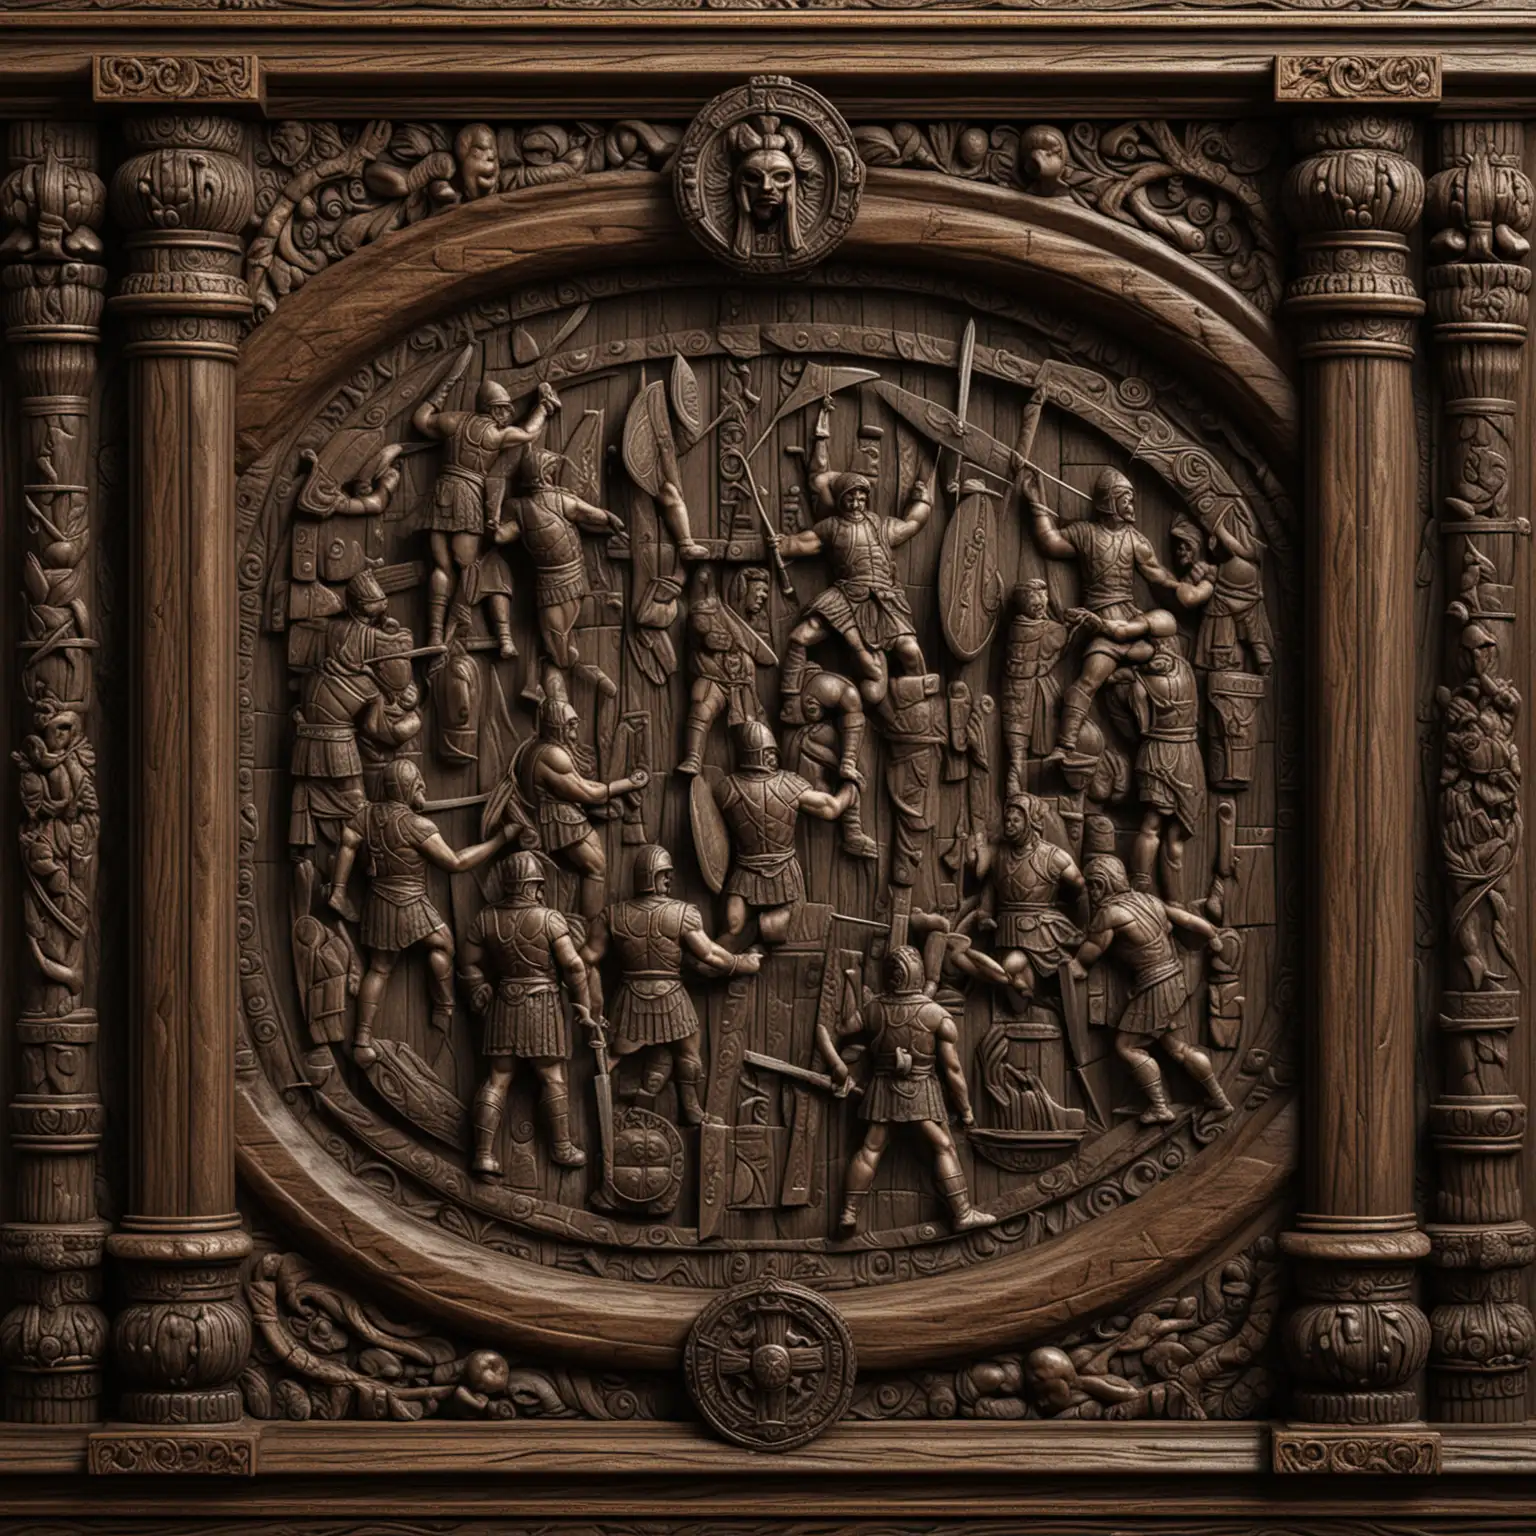 Seamless-Carved-Dark-Wood-Texture-with-Roman-Gladiators-Fighting-in-Arena